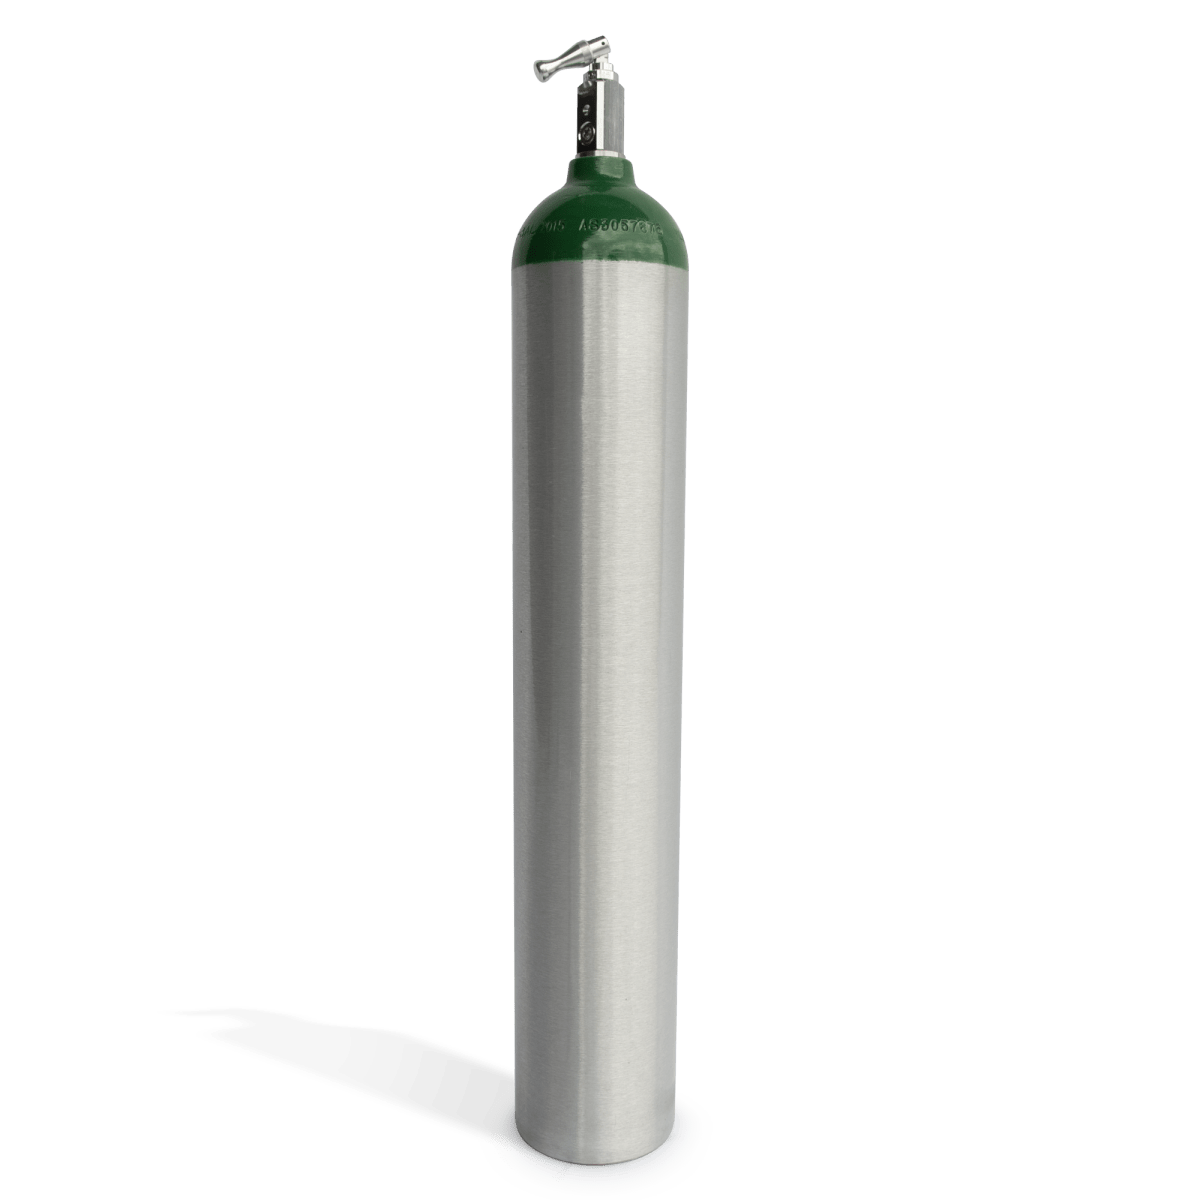 682-Liter USA-Made Oxygen Tank with non-sparking design, green dome, and brushed finish for safety and style on transparent background.